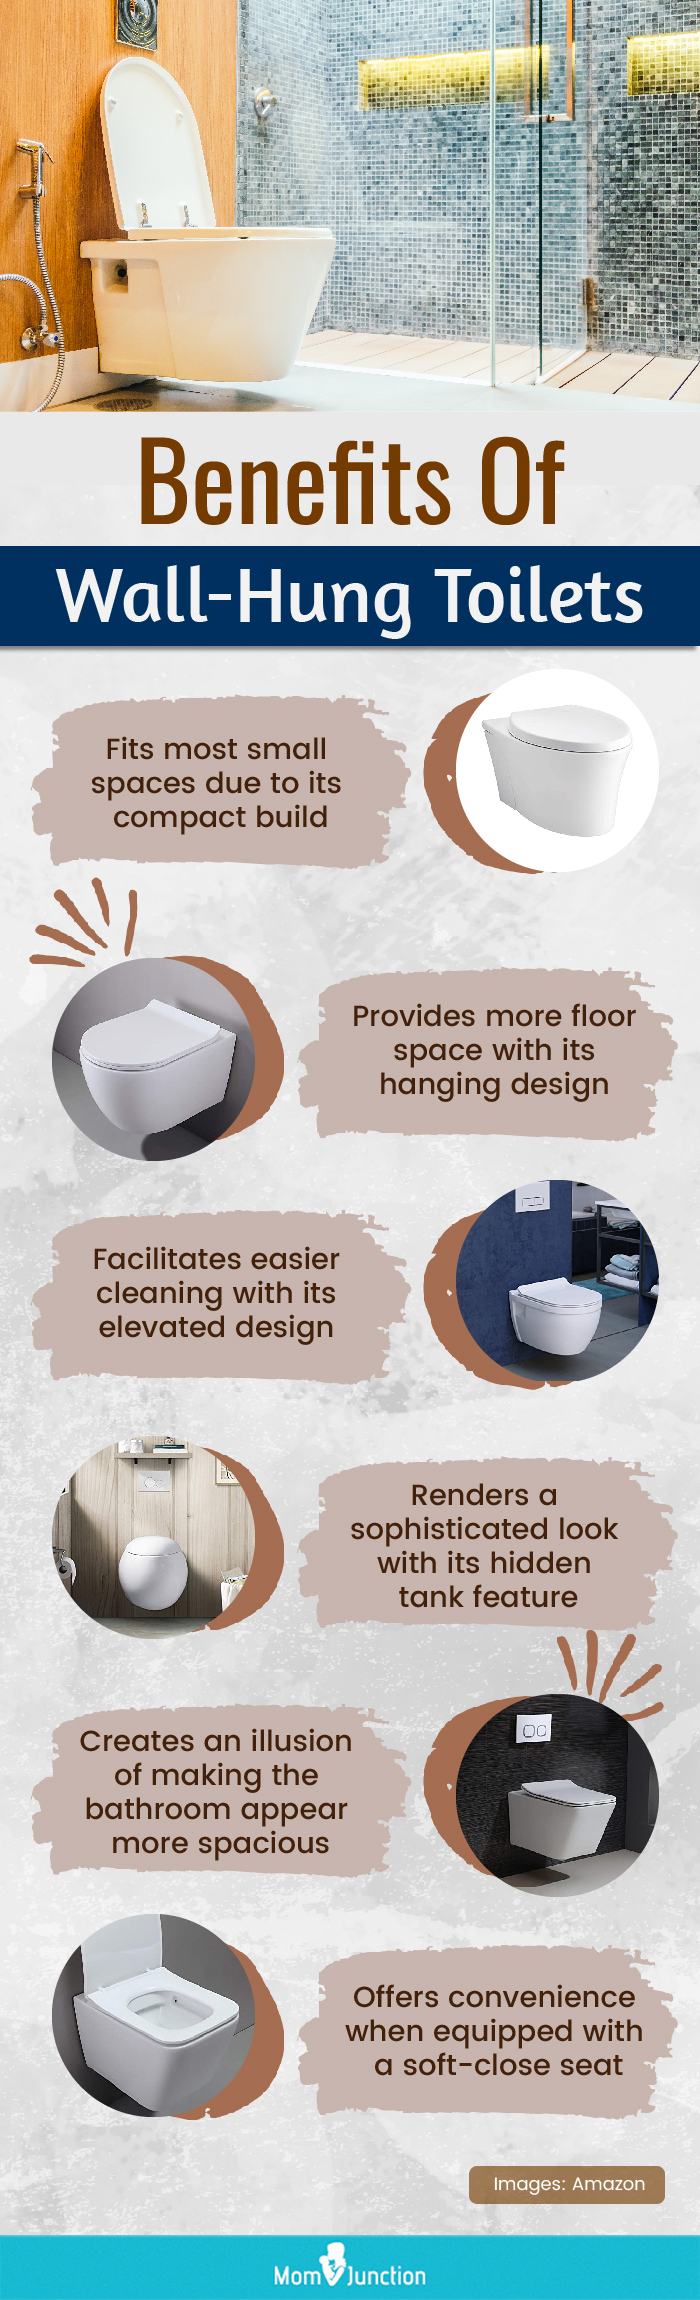 Benefits Of Wall Hung Toilets (infographic)